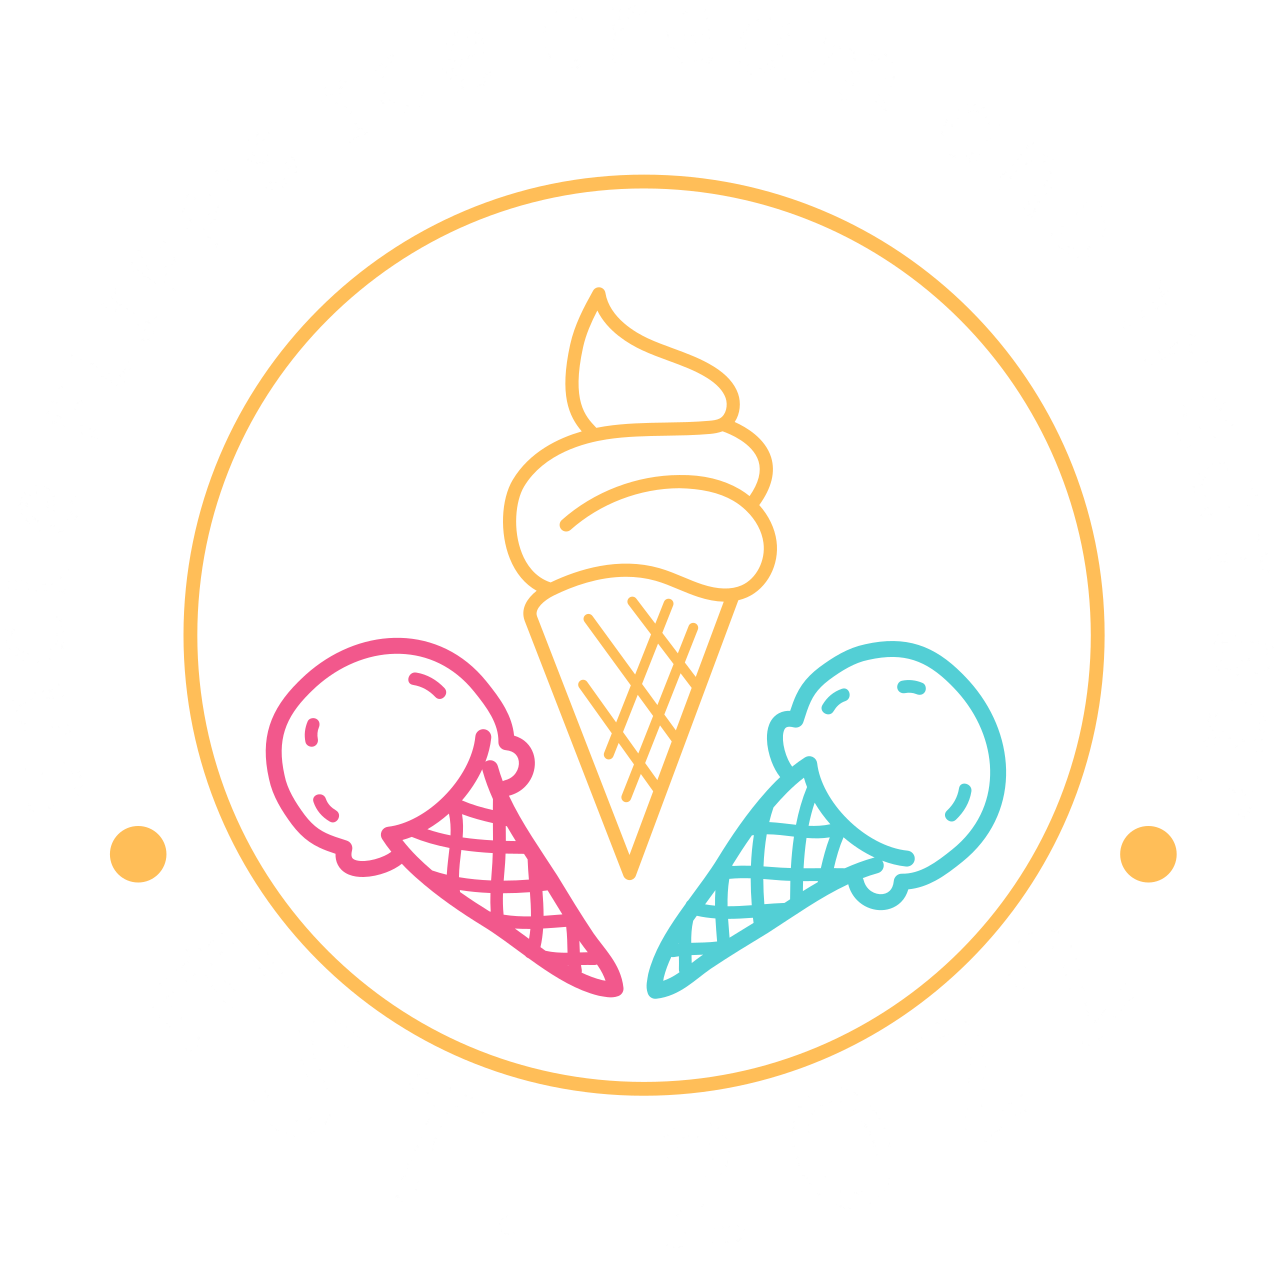 Uncle Flipp's Ice Cream and Treat Bar's web page